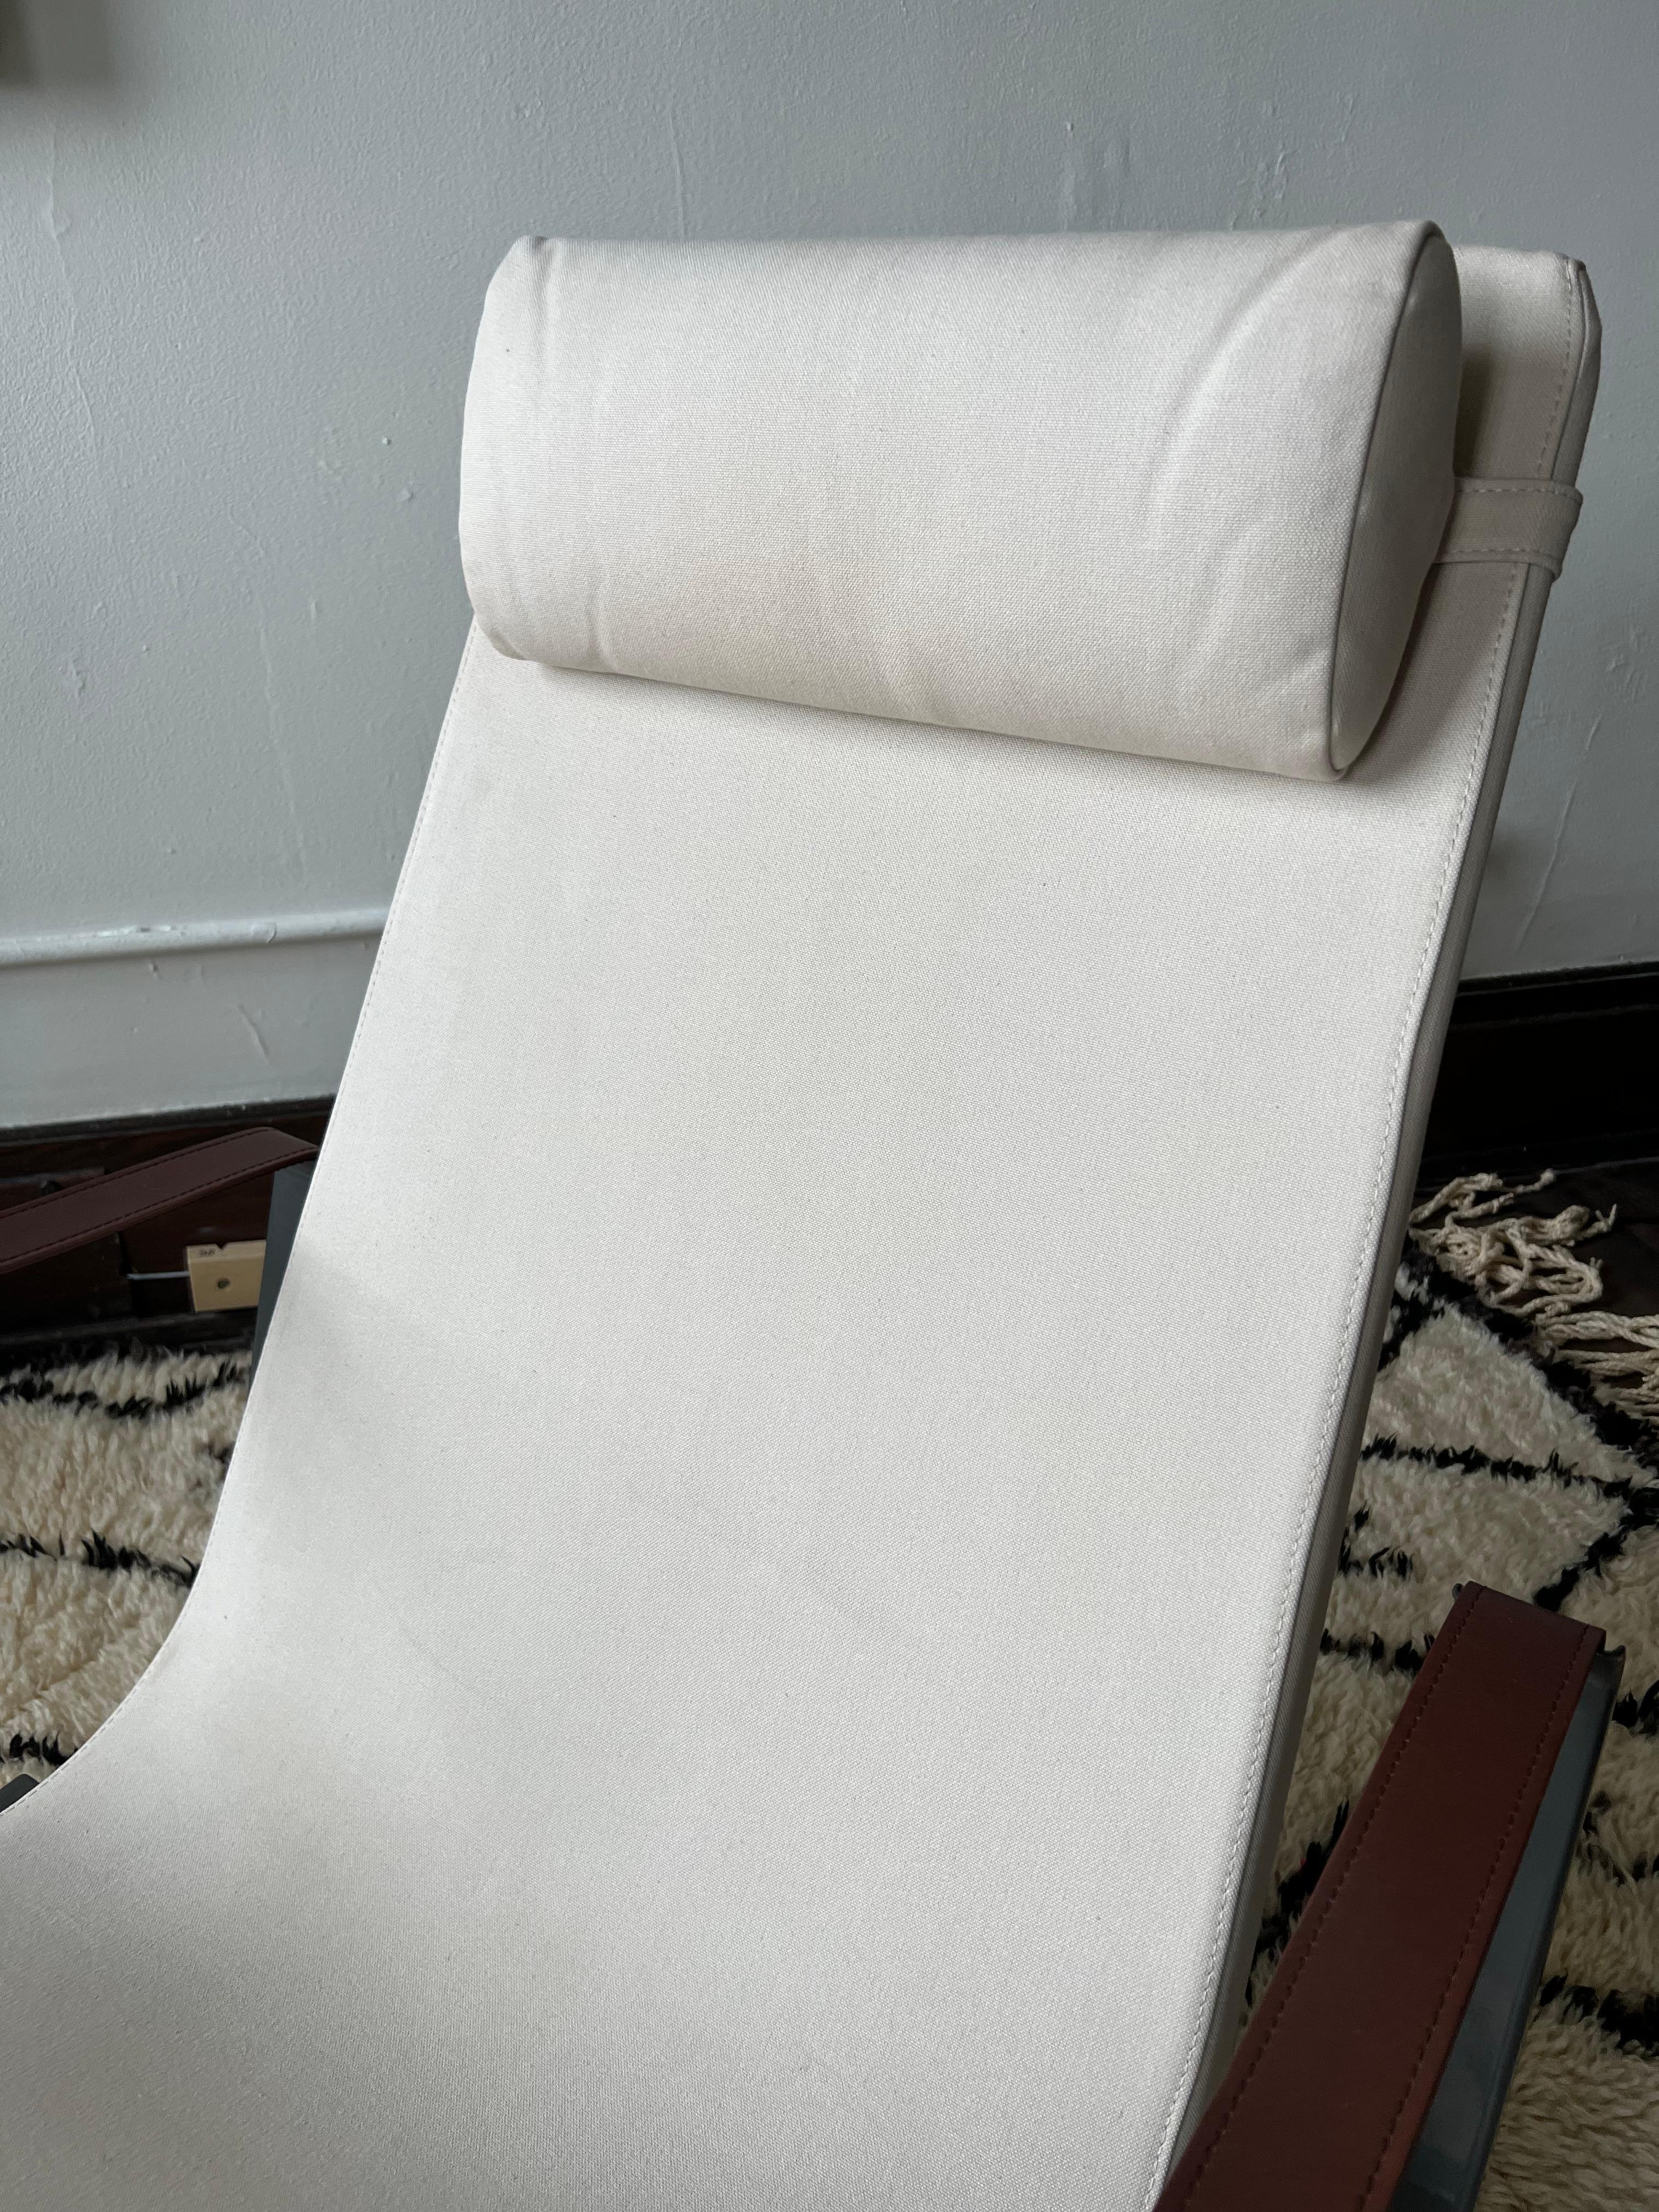 Jean Prouvé Cite Lounge Chair (Prouvé RAW Edition) by G Star Raw and Vitra In Good Condition For Sale In Saint Paul, MN